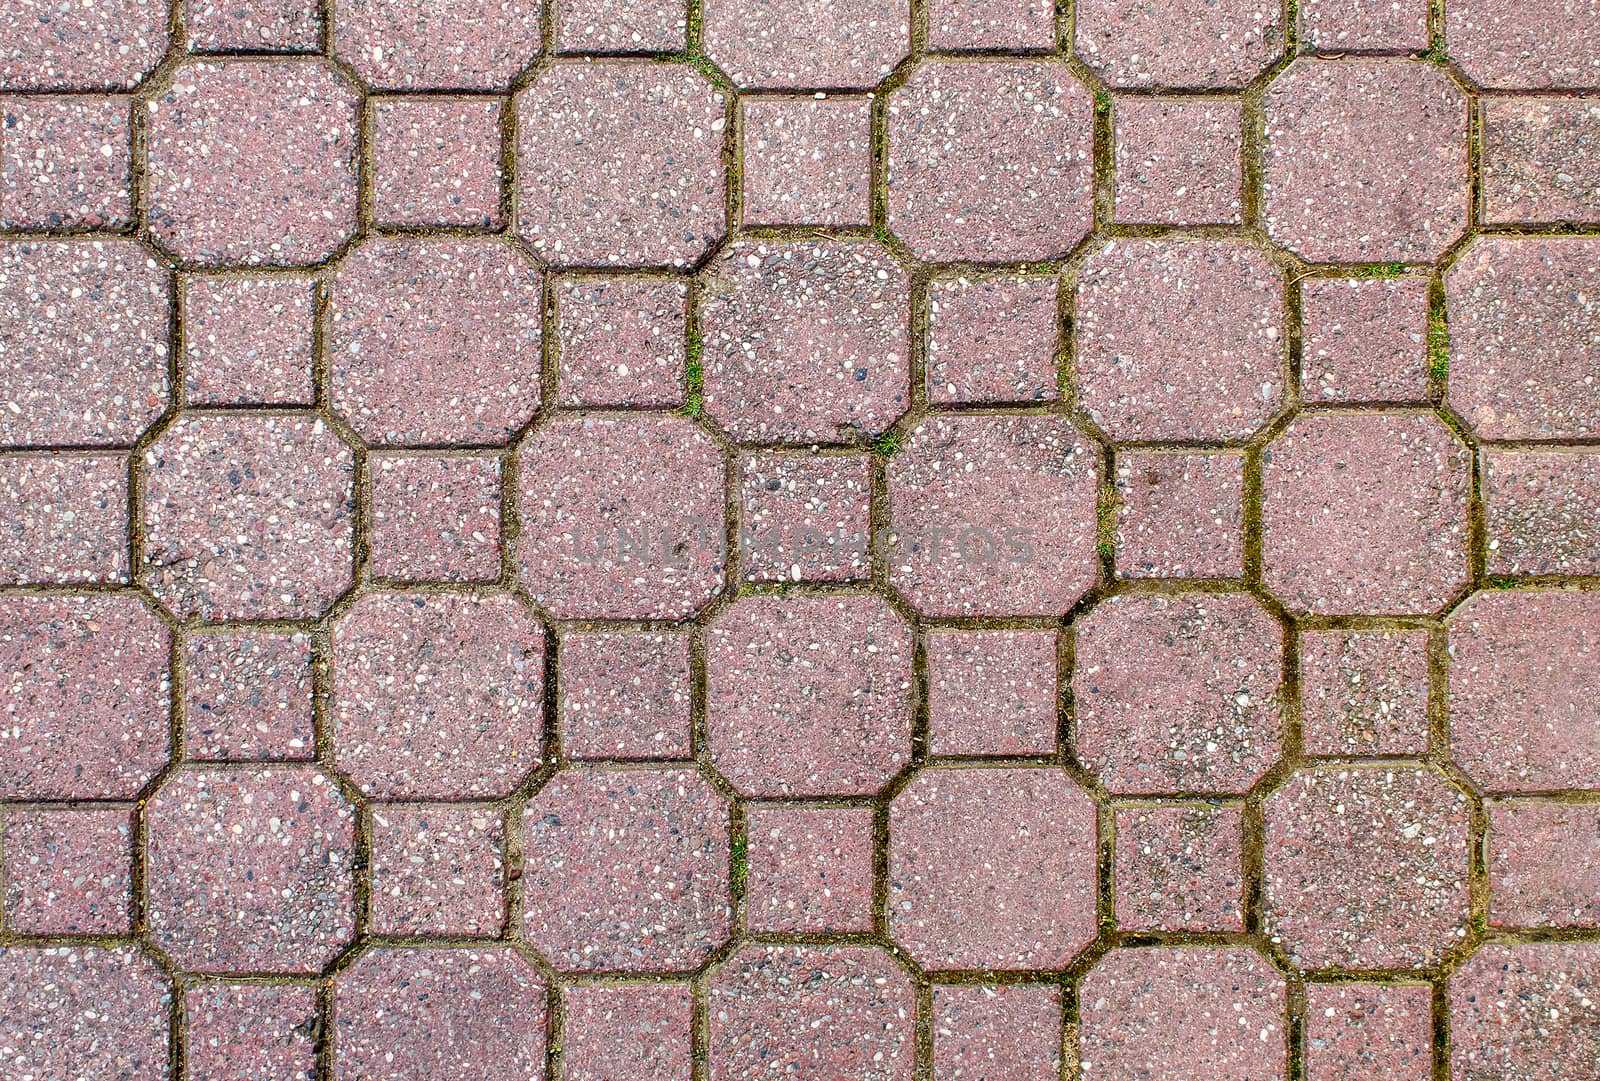 road paved with sidewalk tiles. beautiful brick background with, masonry texture of light brown bricks. outdoor closeup